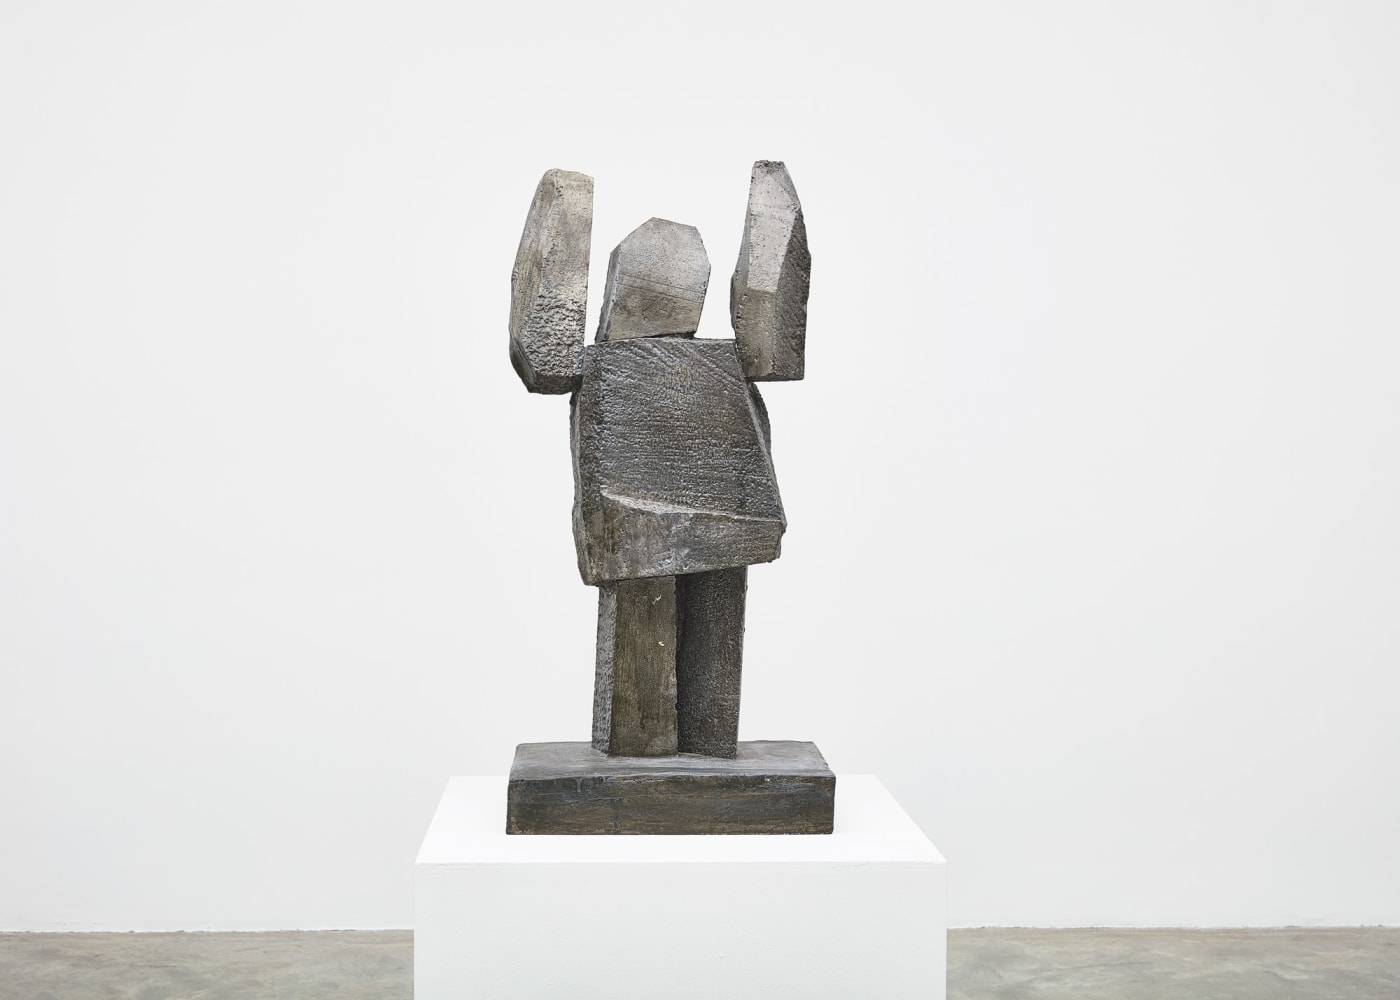 Gimhongsok (b. 1964)
Surrender - Brown, 2018
High-strength grout cement
34 1/4 x 15 3/4 x 11 13/16 inches
87 x 40 x 30 cm
Edition of 3